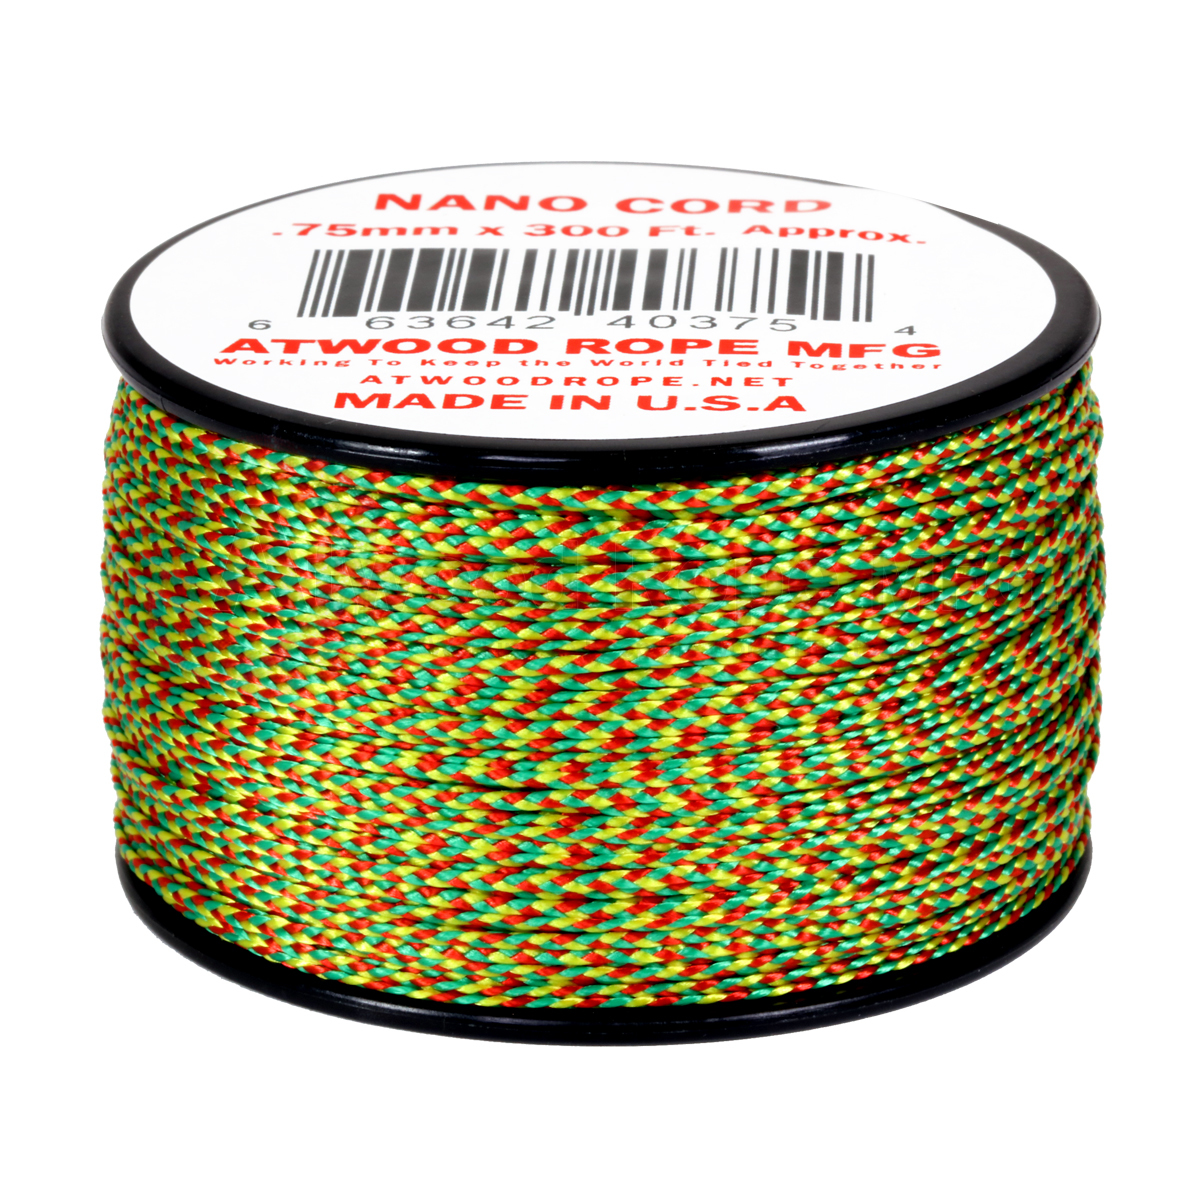 Atwood Rope MFG Nano Cord (36lb/17kg) 90m Made in USA, Various Colours